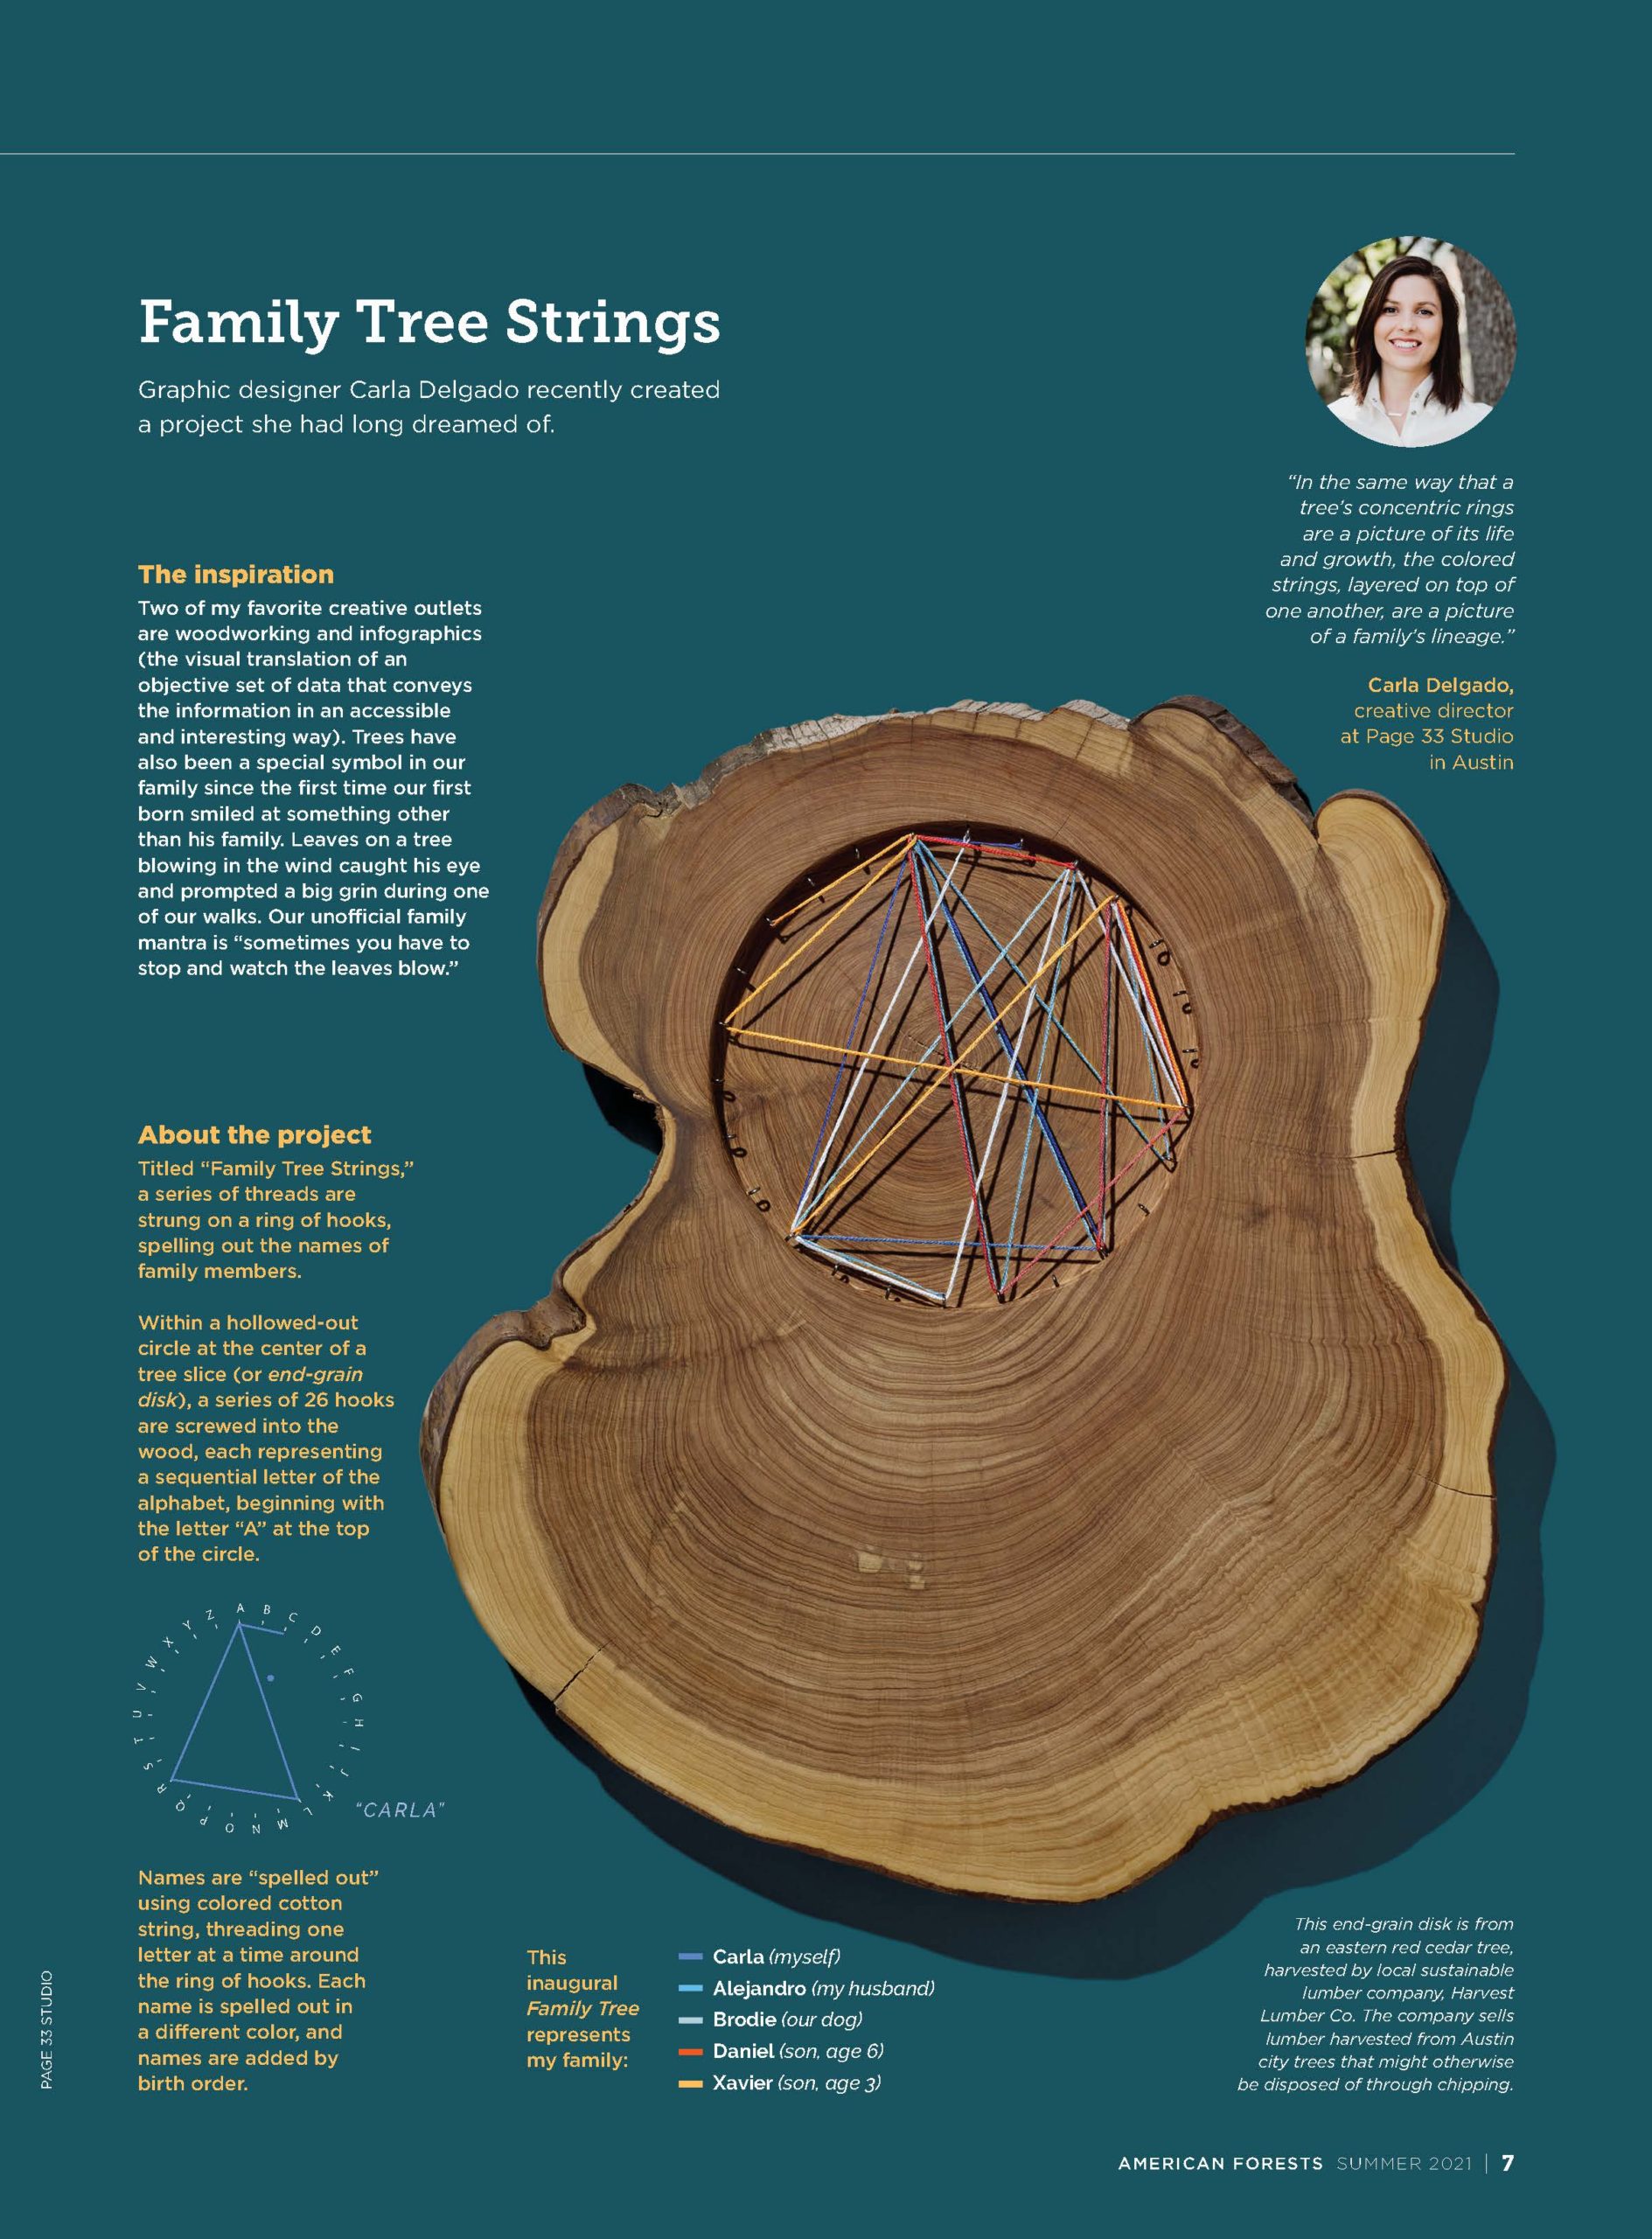 Graphic designer Carla Delgado creates a project that reflects her family and their love of trees.